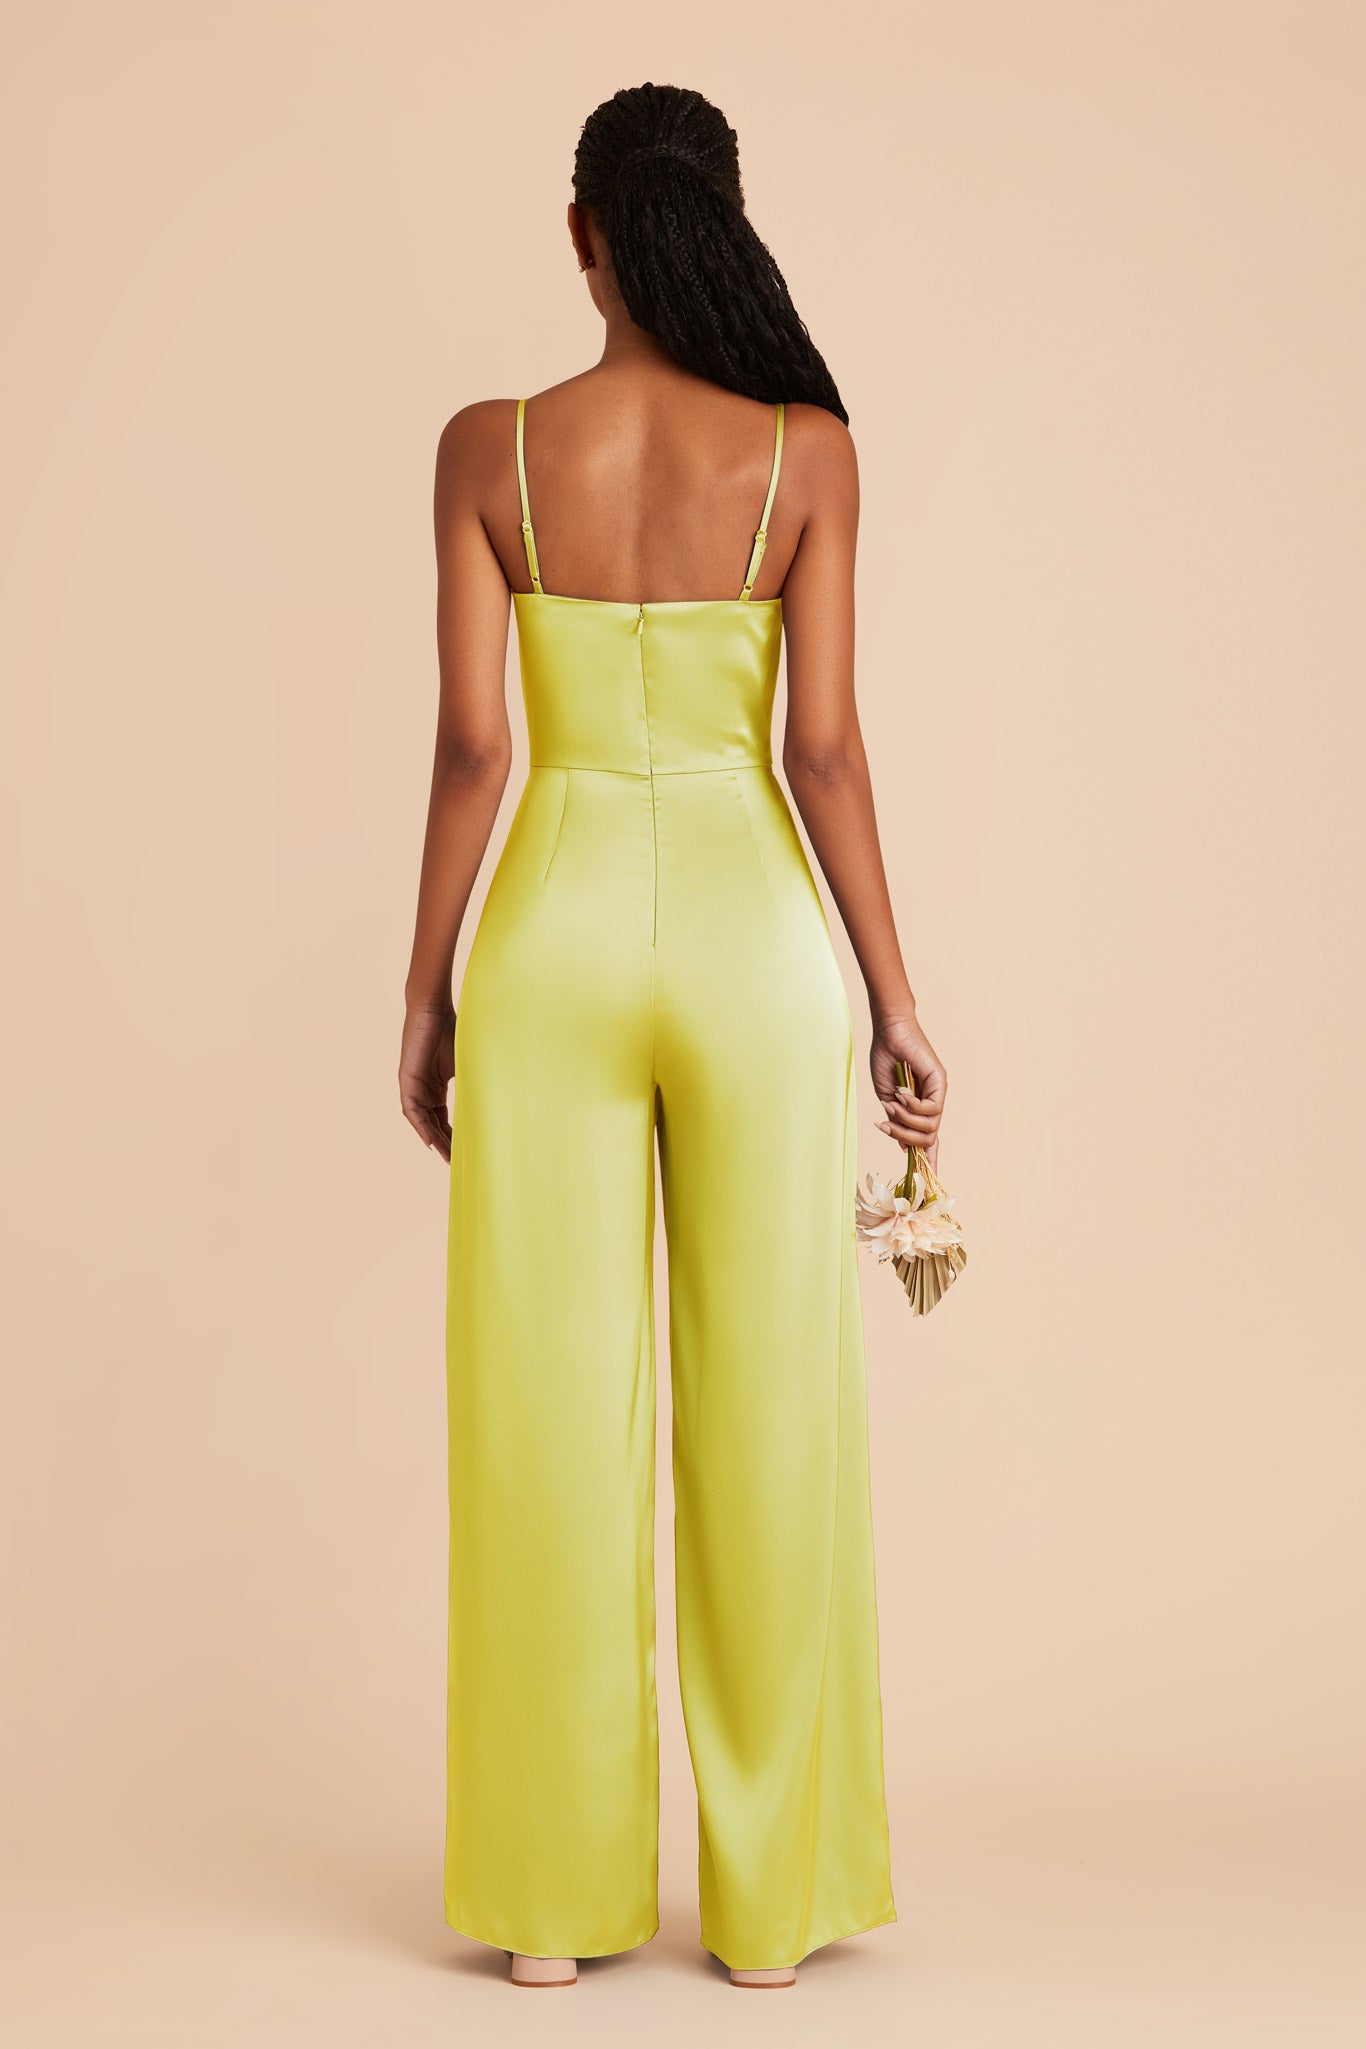 Chartreuse Donna Matte Satin Bridesmaid Jumpsuit by Birdy Grey